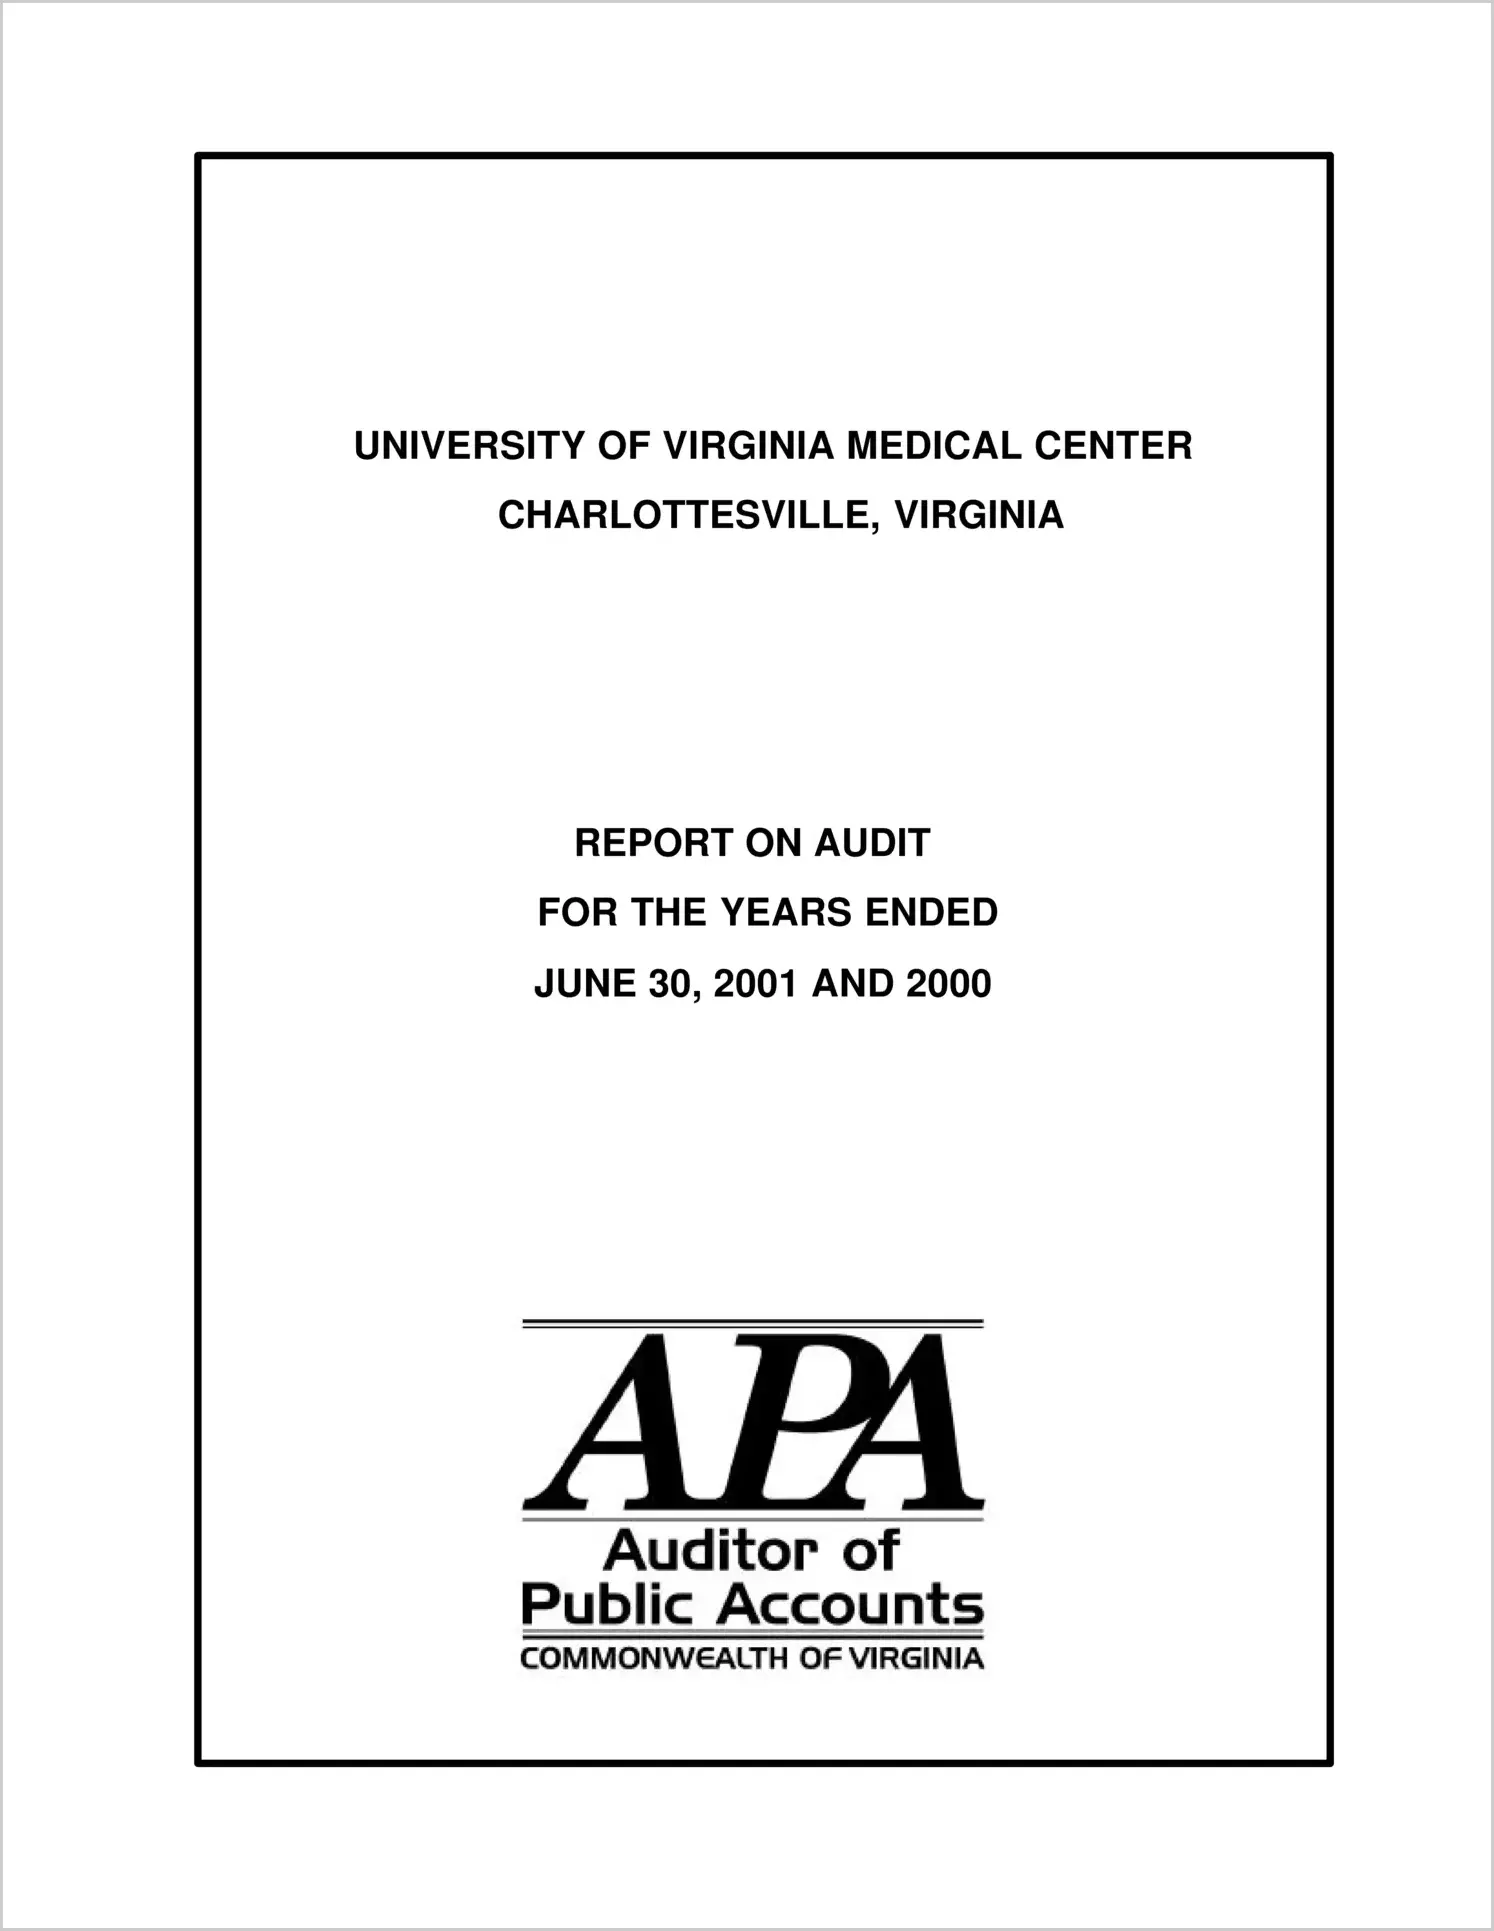 University of Virginia Medical Center for the years ended June 30, 2001 and 2000